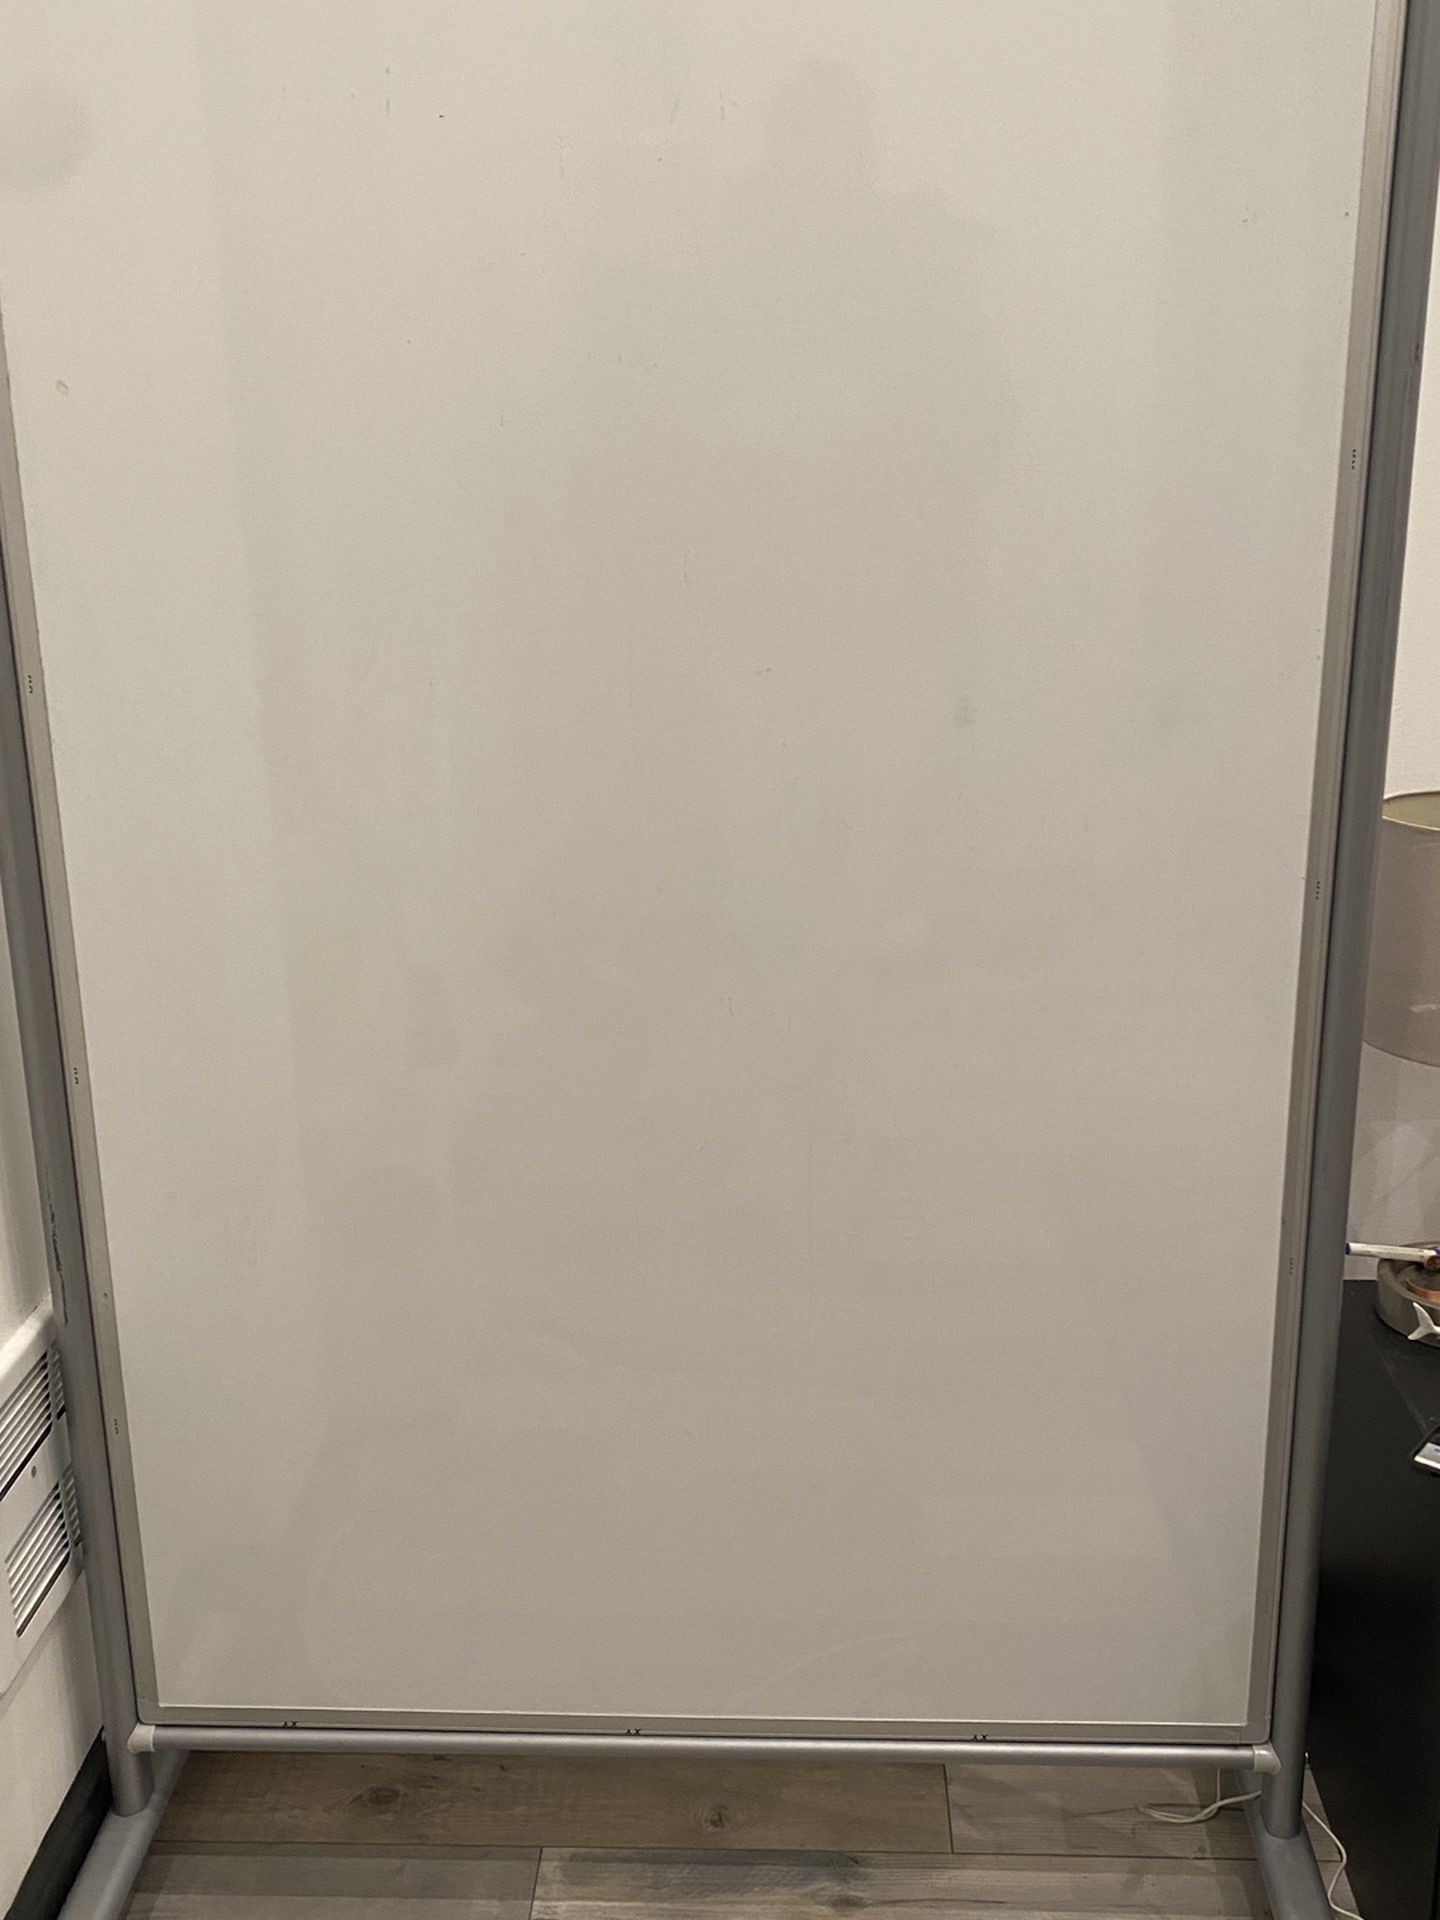 Whiteboard. 2 Sided Magnetic Base And Wheels